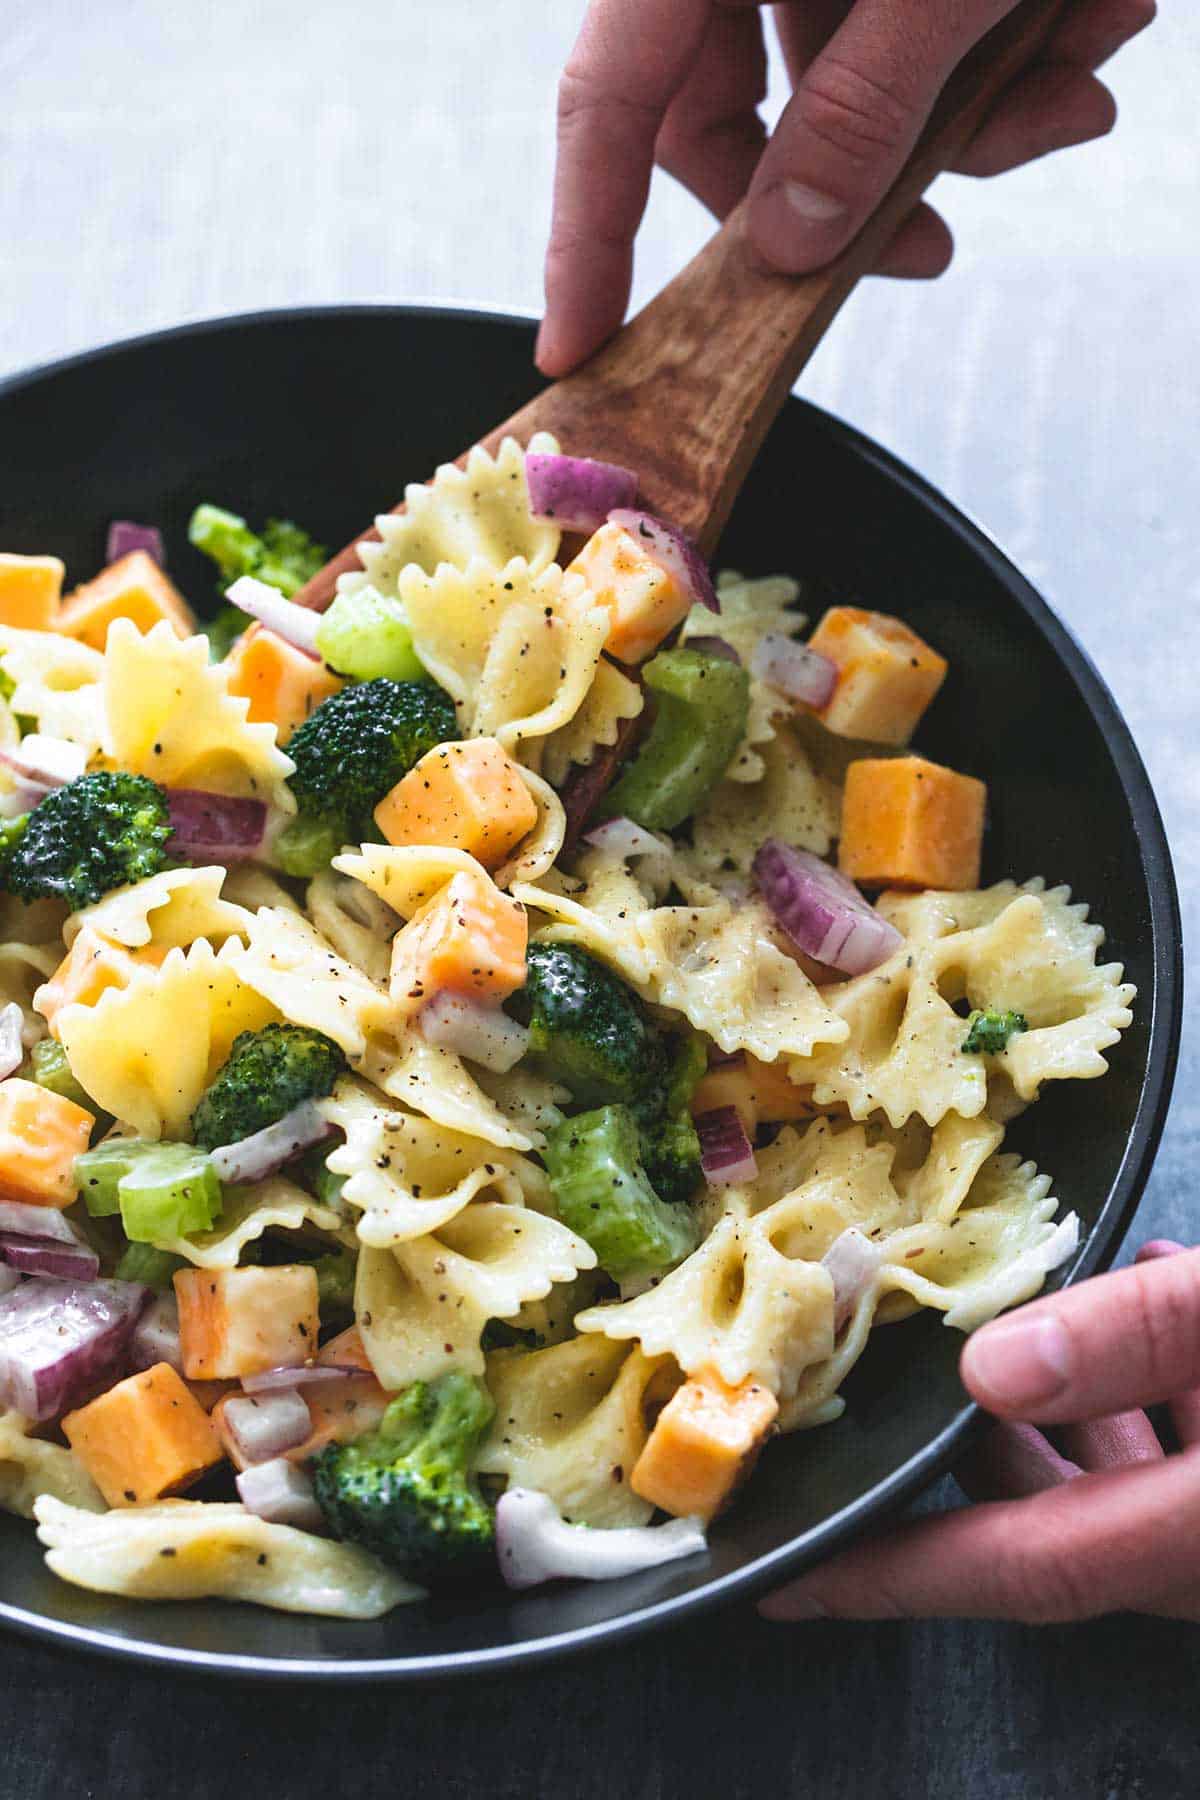 a hand scooping some creamy cheddar broccoli salad from a bowl with a wooden serving spoon.